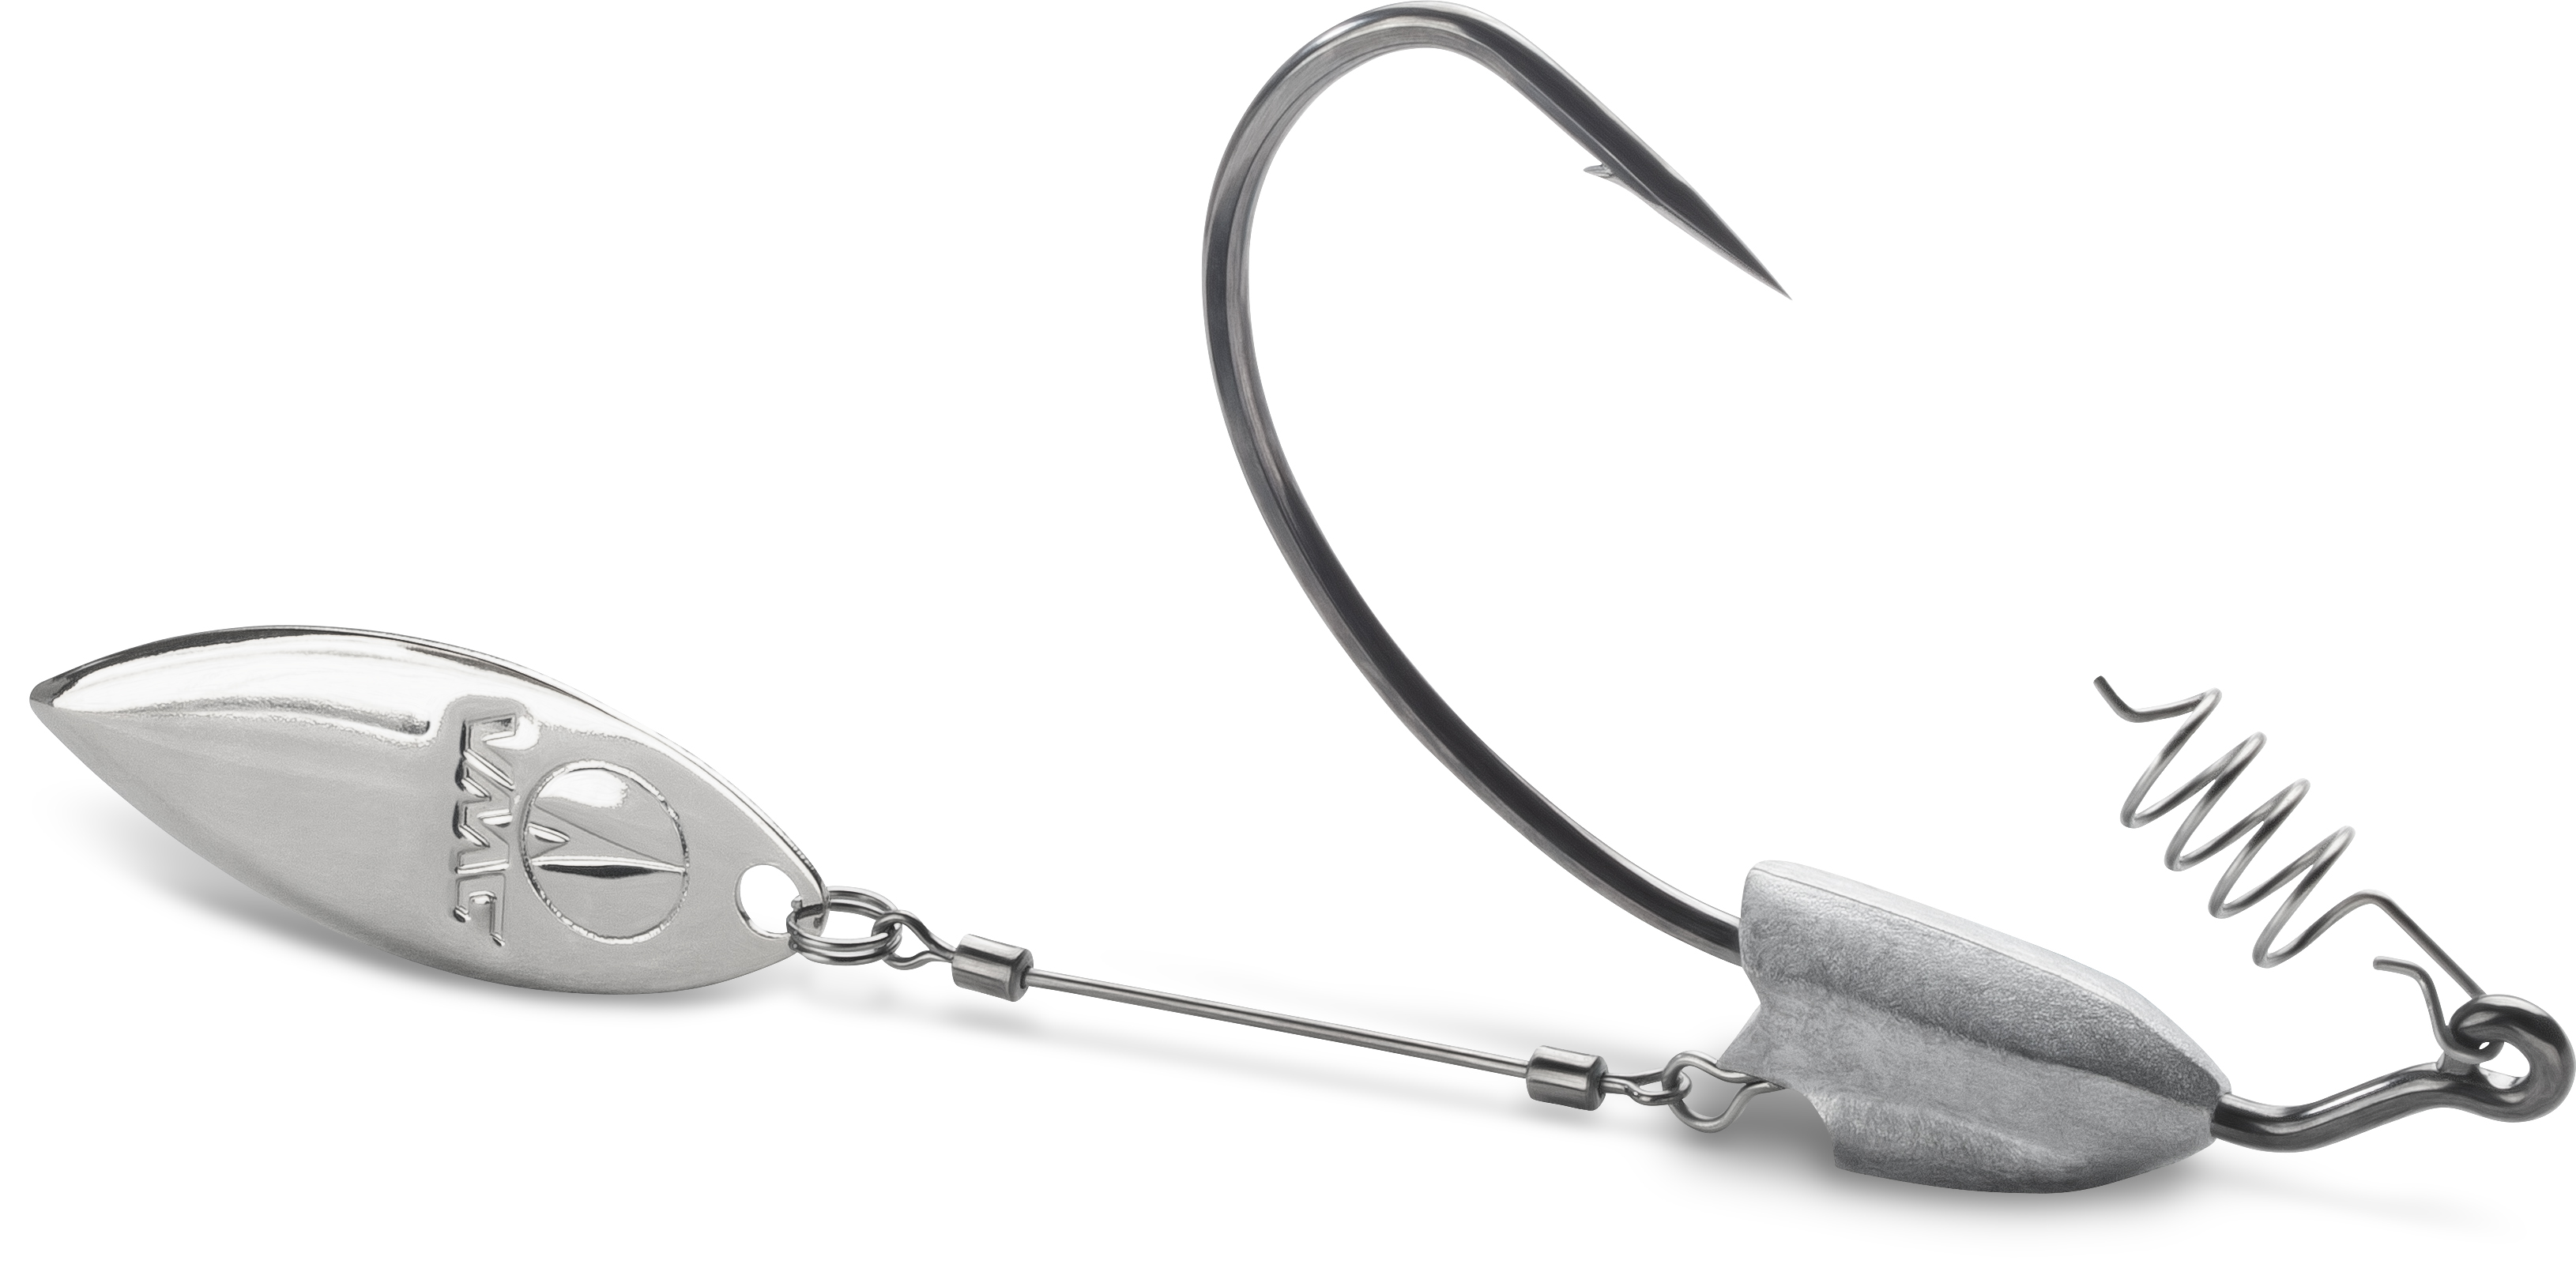 ICAST 2019: VMC Heavy Duty Weighted Willow Swimbait Hook - On The